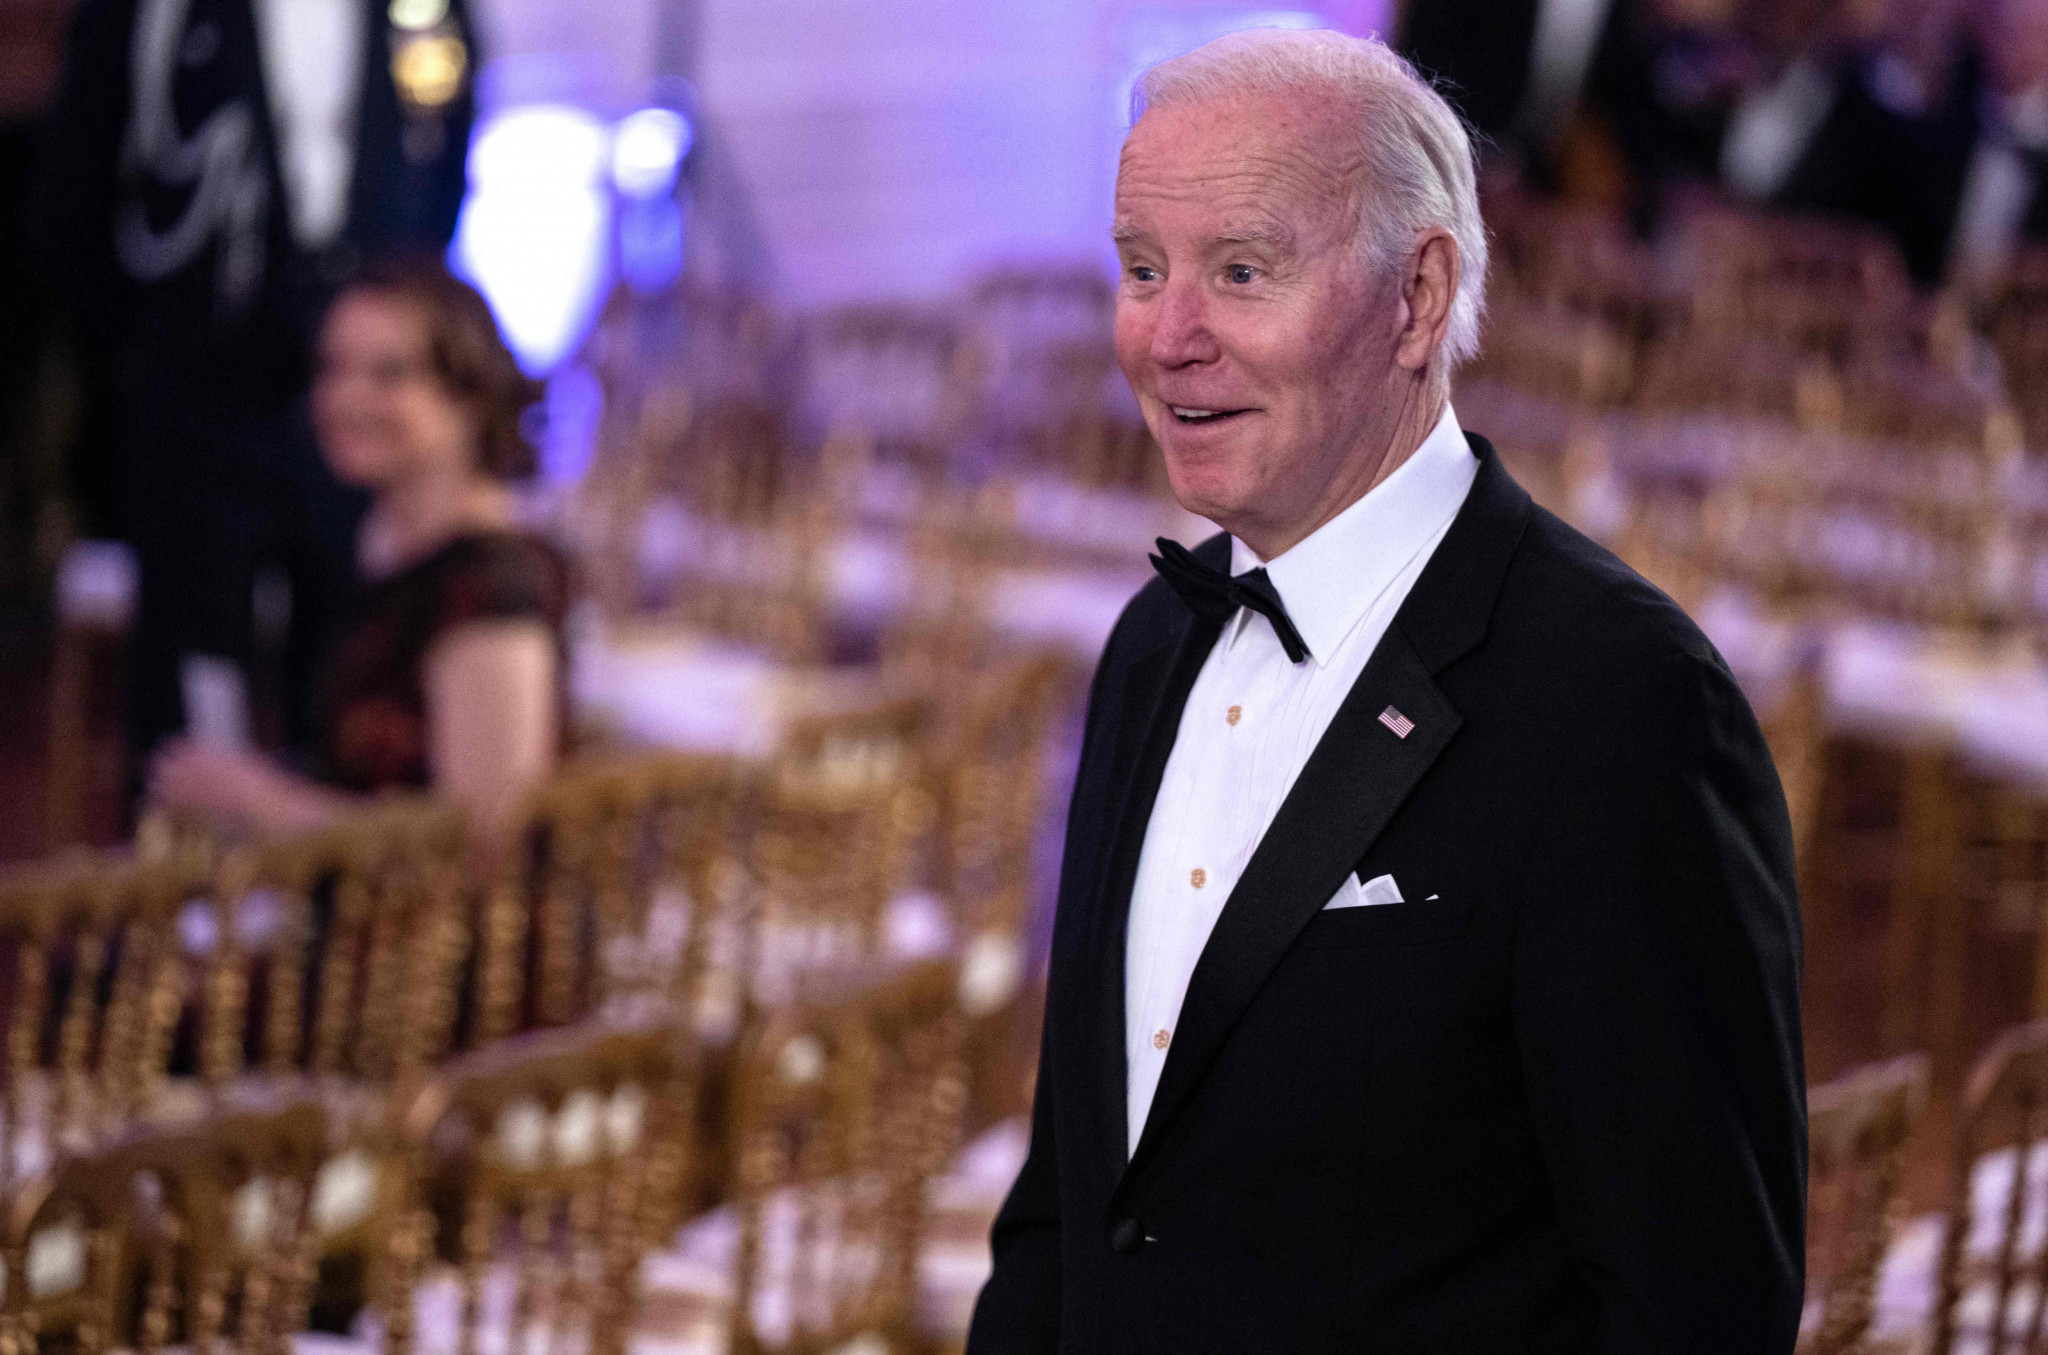 Political leaders like United States President Joe Biden has more social media following than The White House ©Getty Images